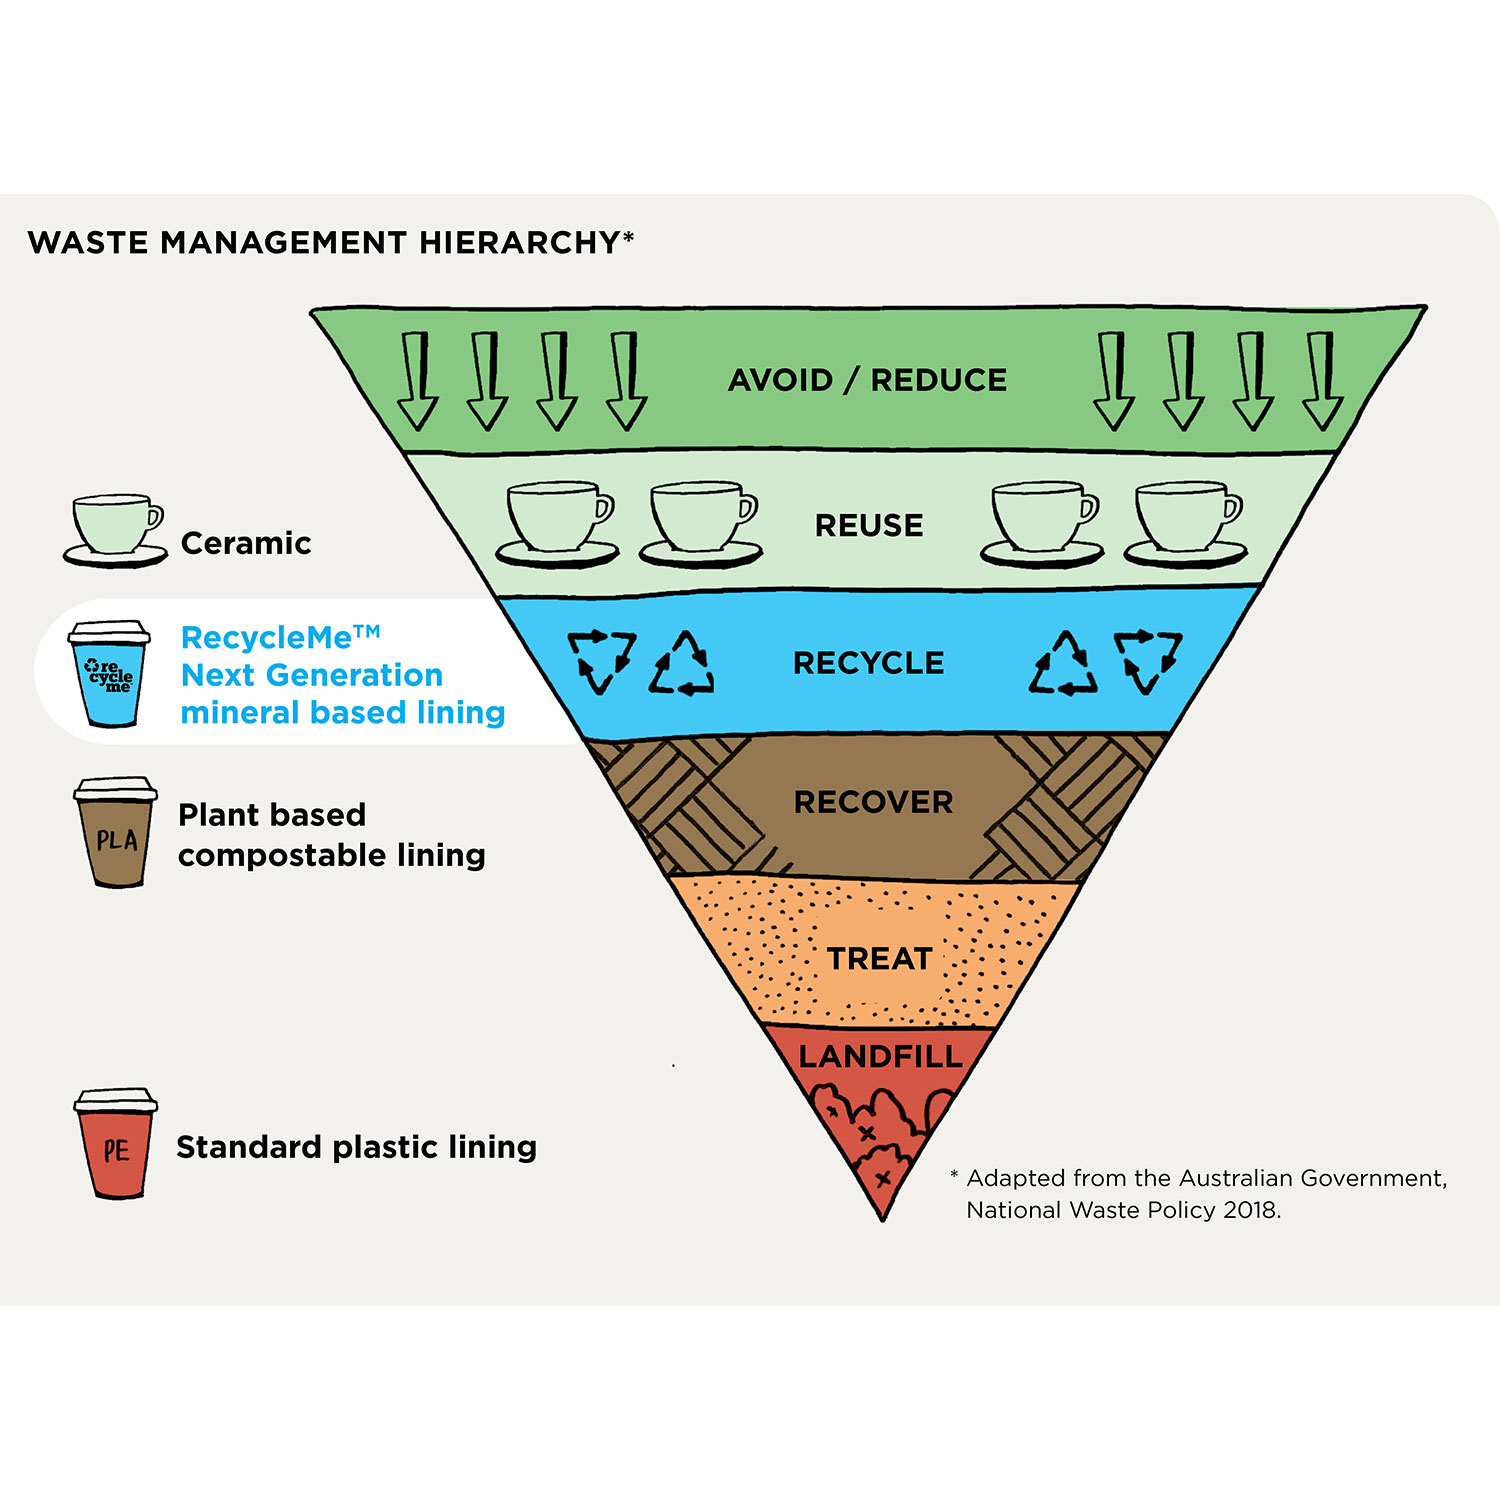 Image of the waste management hierarchy, showing recycling as the best option for takeaway cups